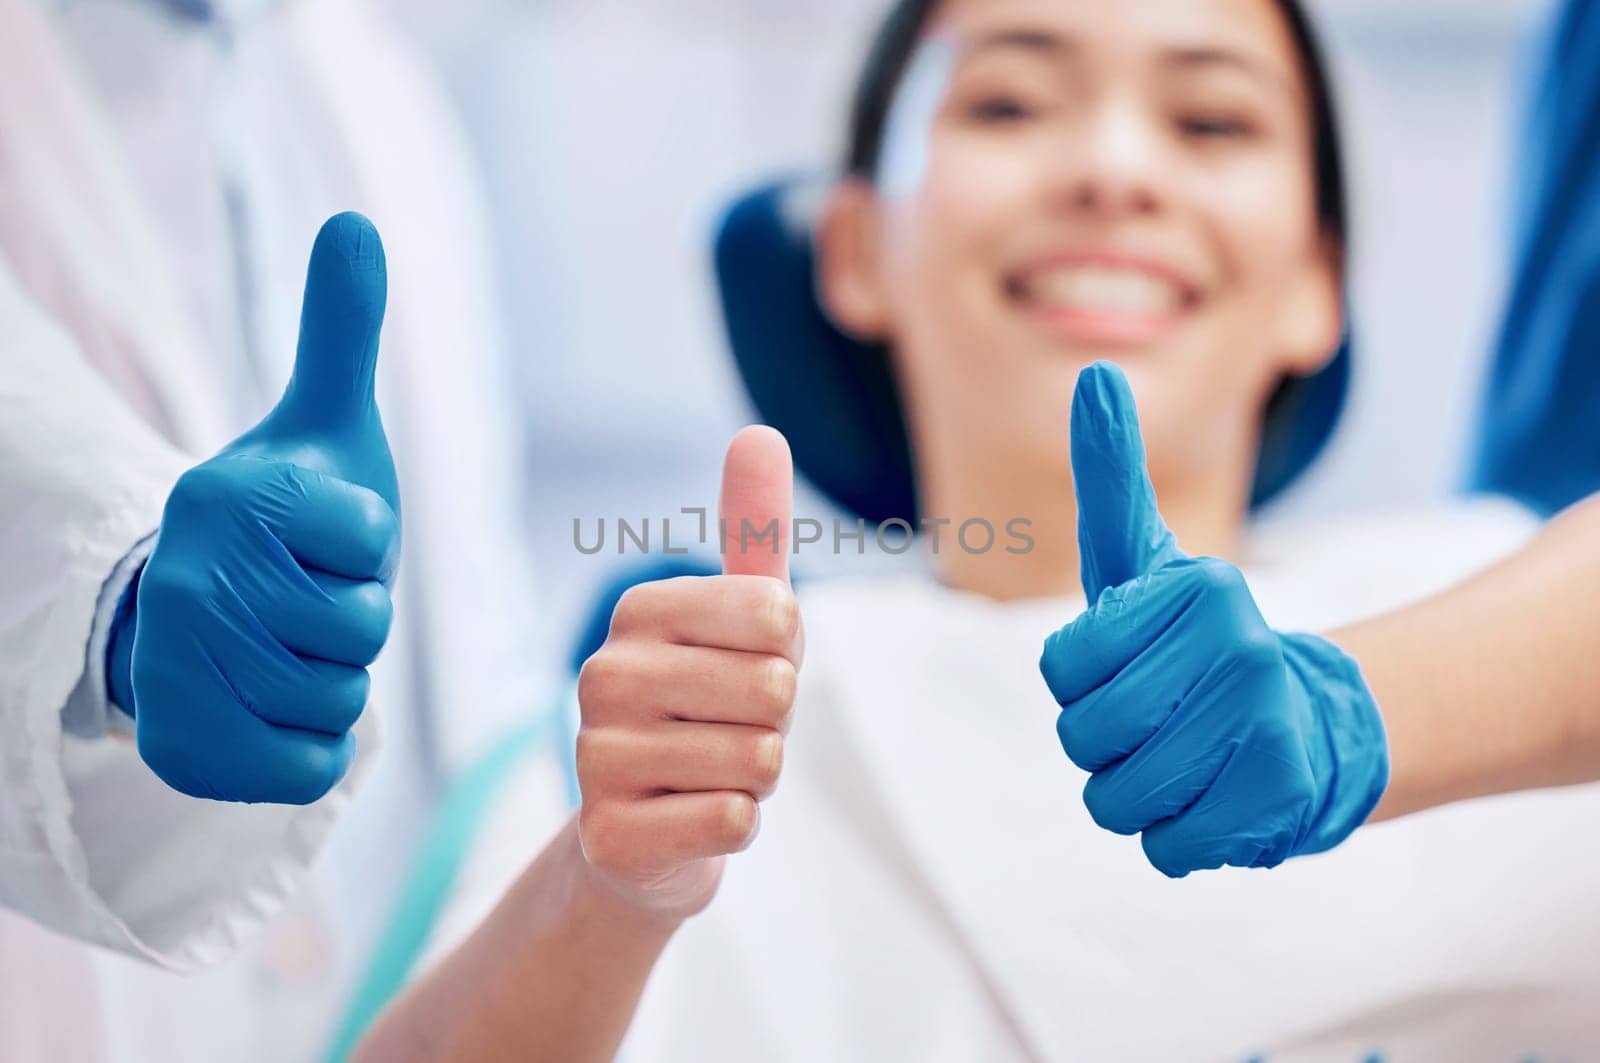 Dentist, thumbs up and happy patient in consultation for teeth whitening, service and dental care. Healthcare, dentistry and hand sign of orthodontist and woman for oral hygiene, wellness or cleaning by YuriArcurs